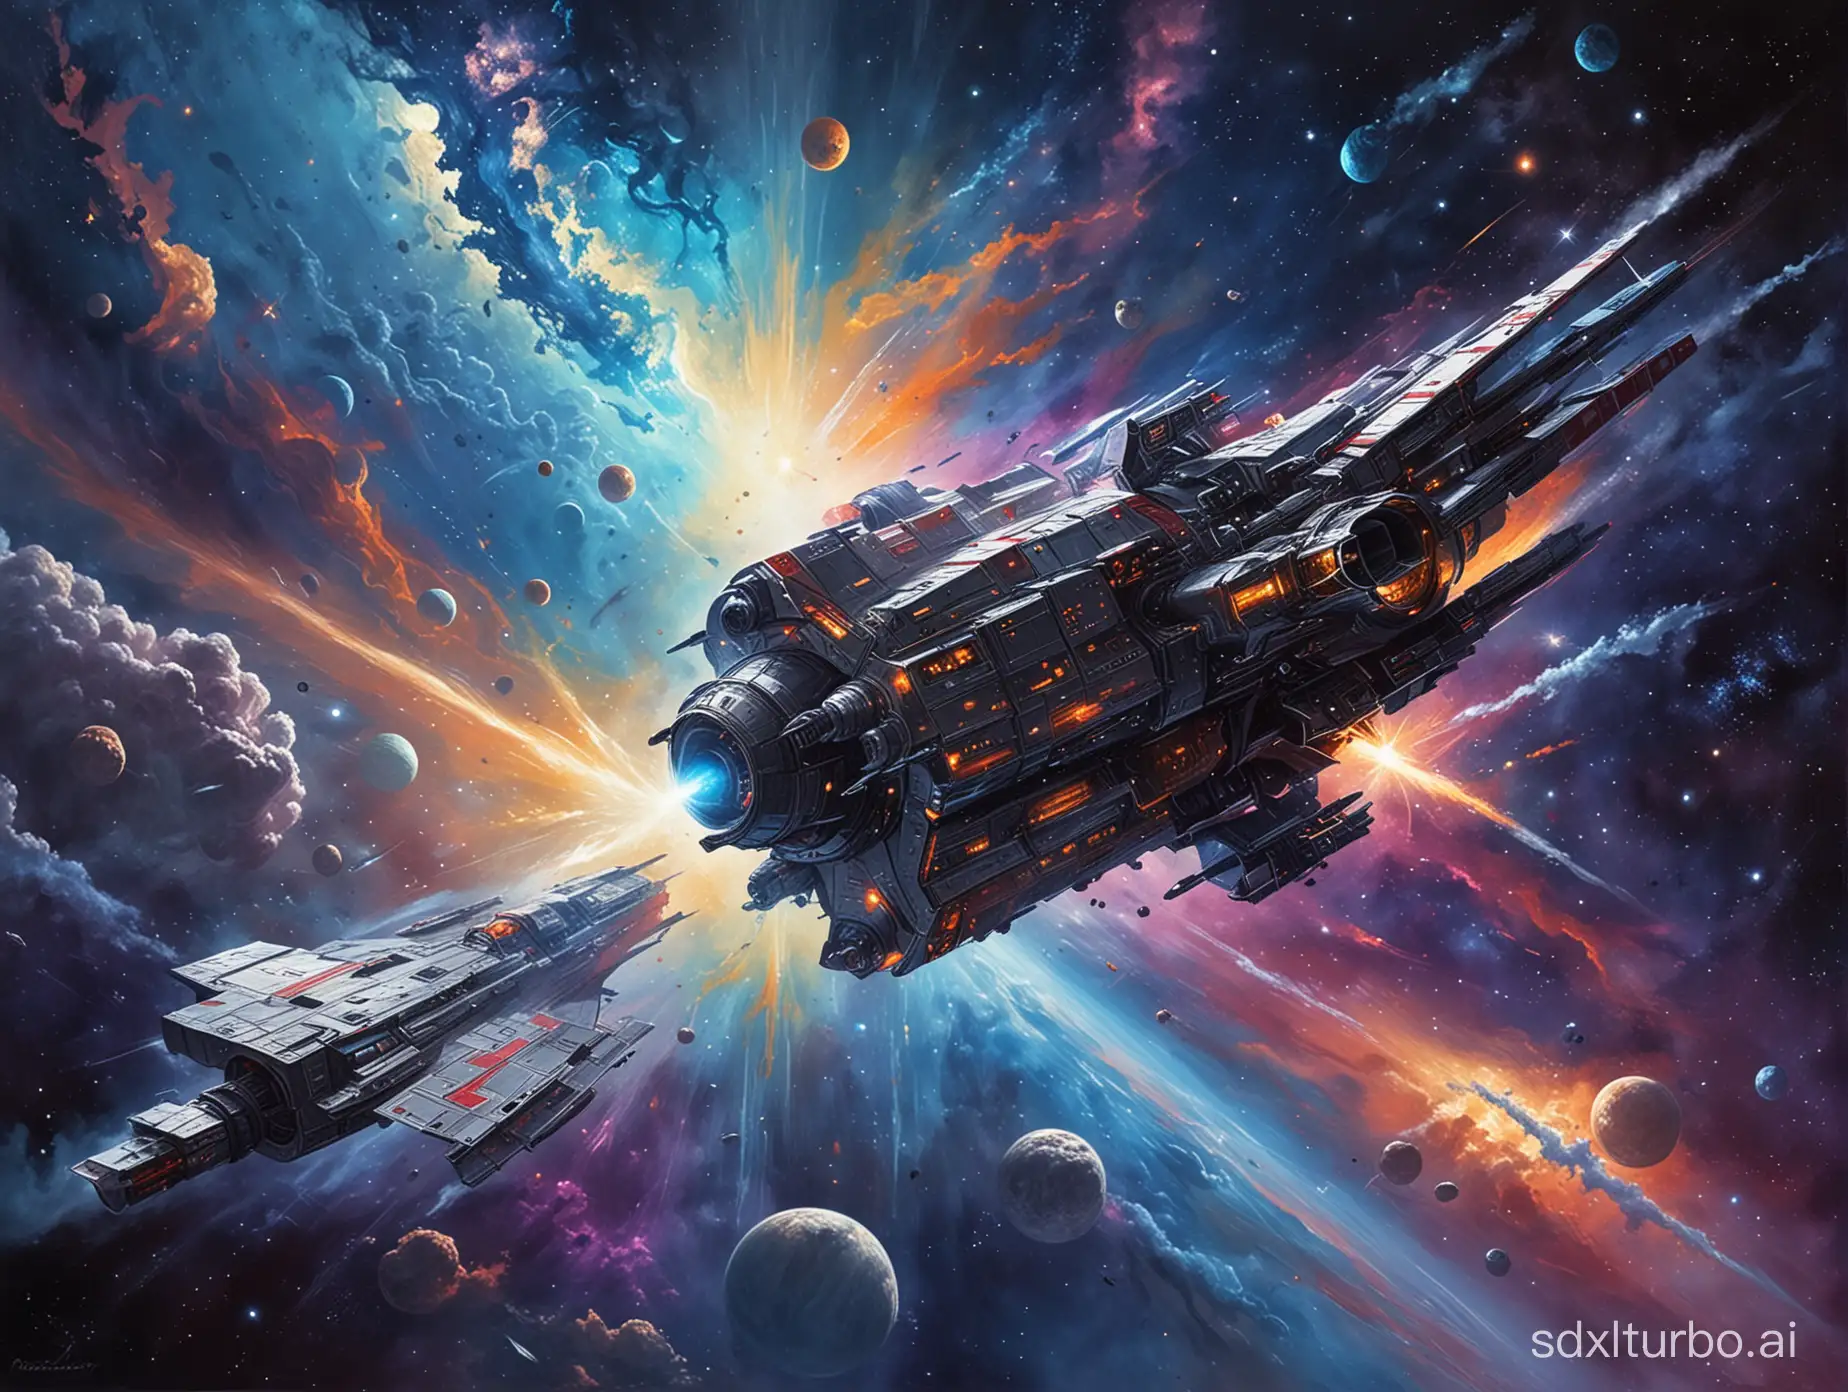 Space science fiction painting